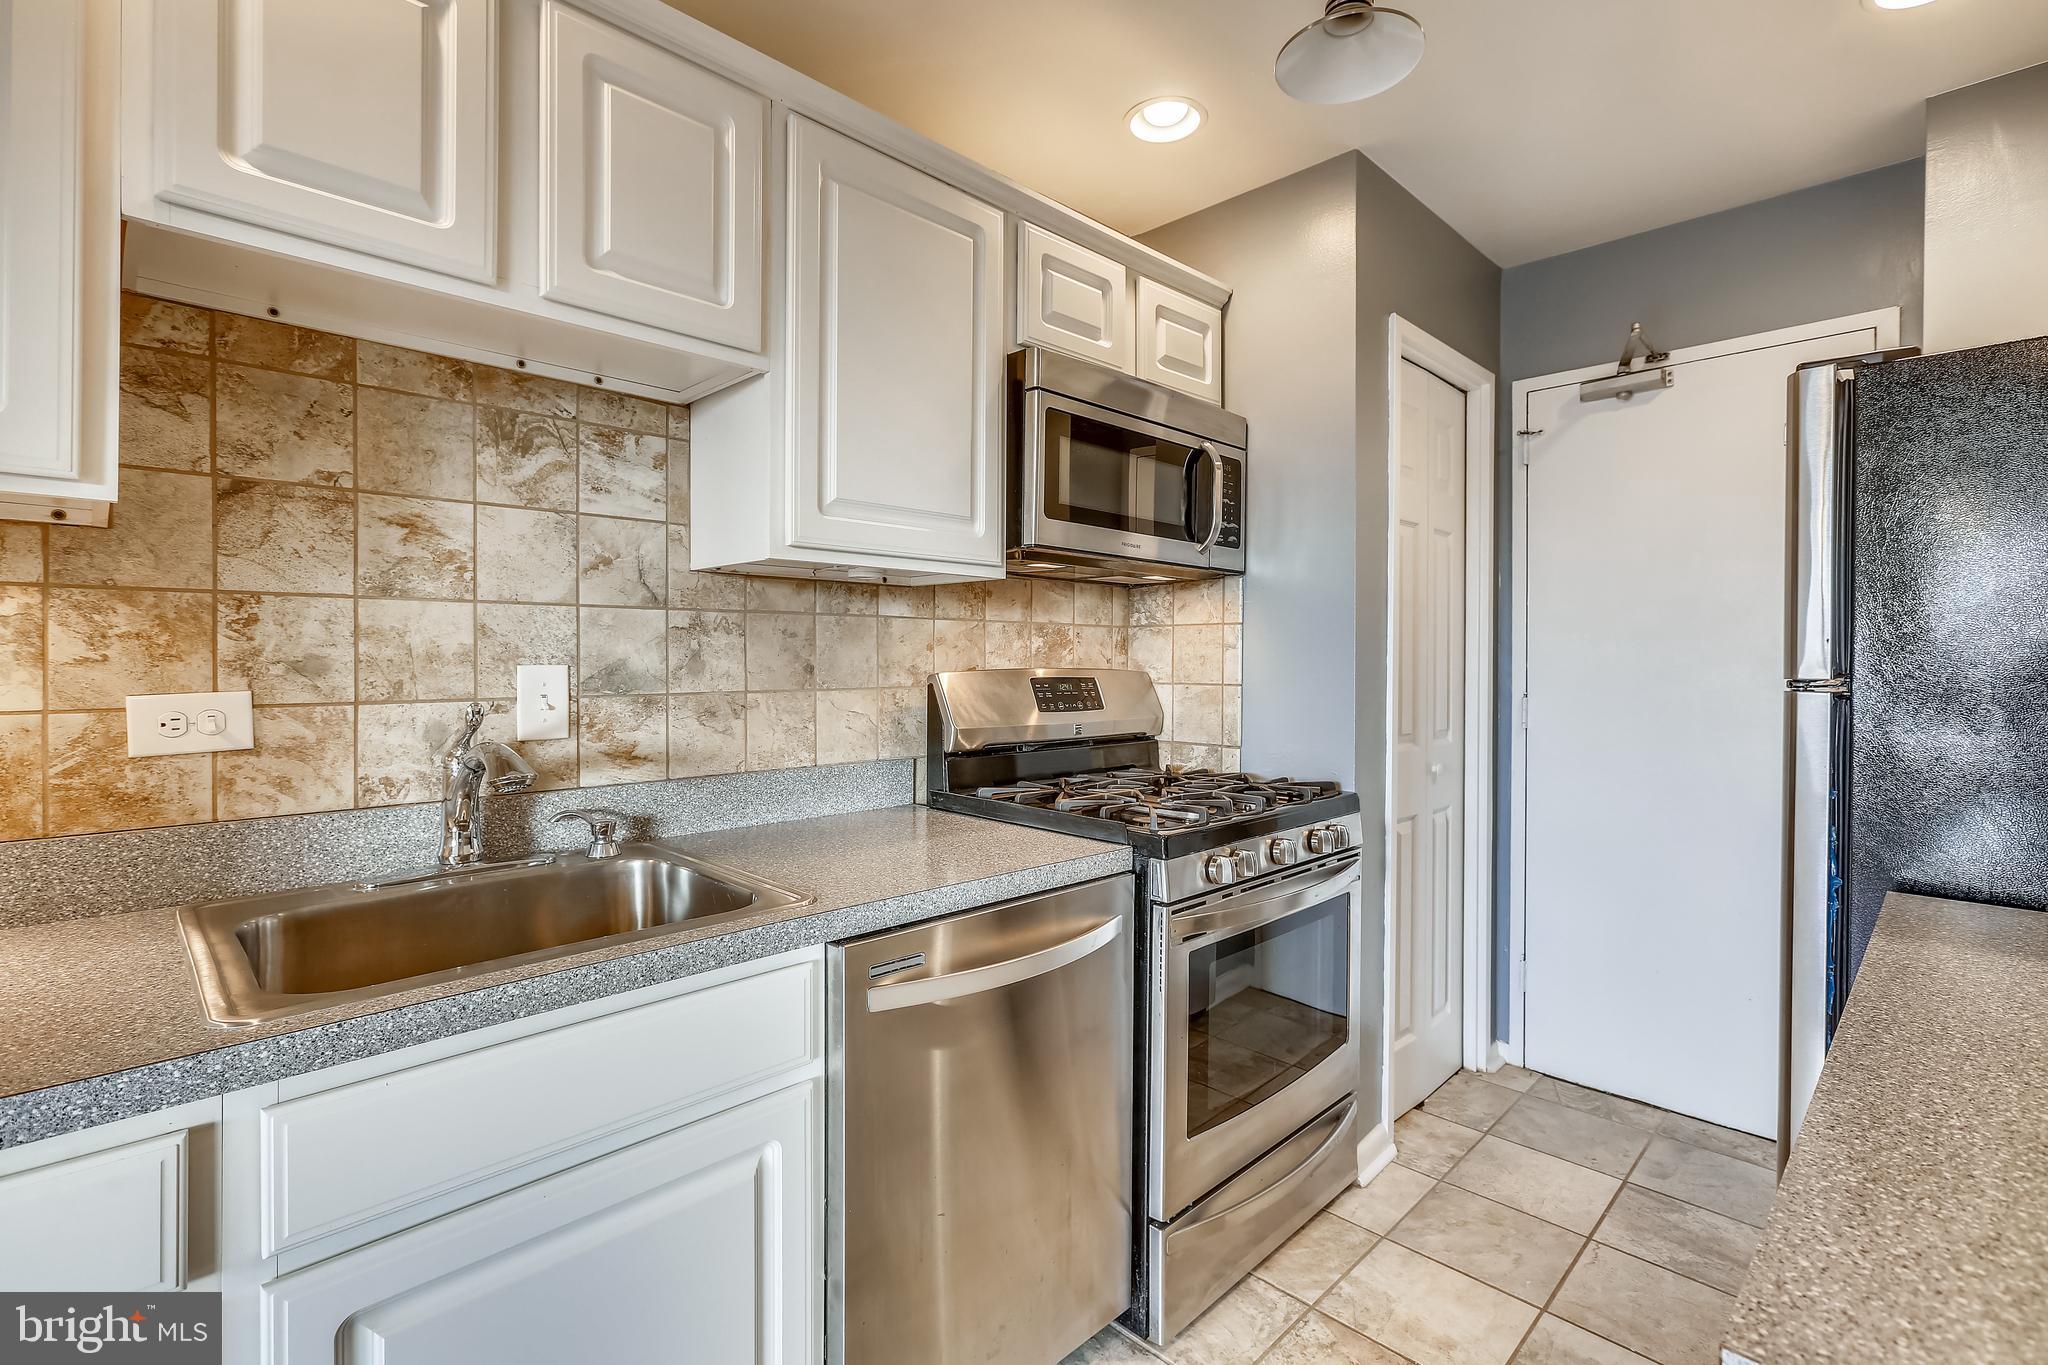 a kitchen with stainless steel appliances white cabinets a stove top oven a sink and dishwasher